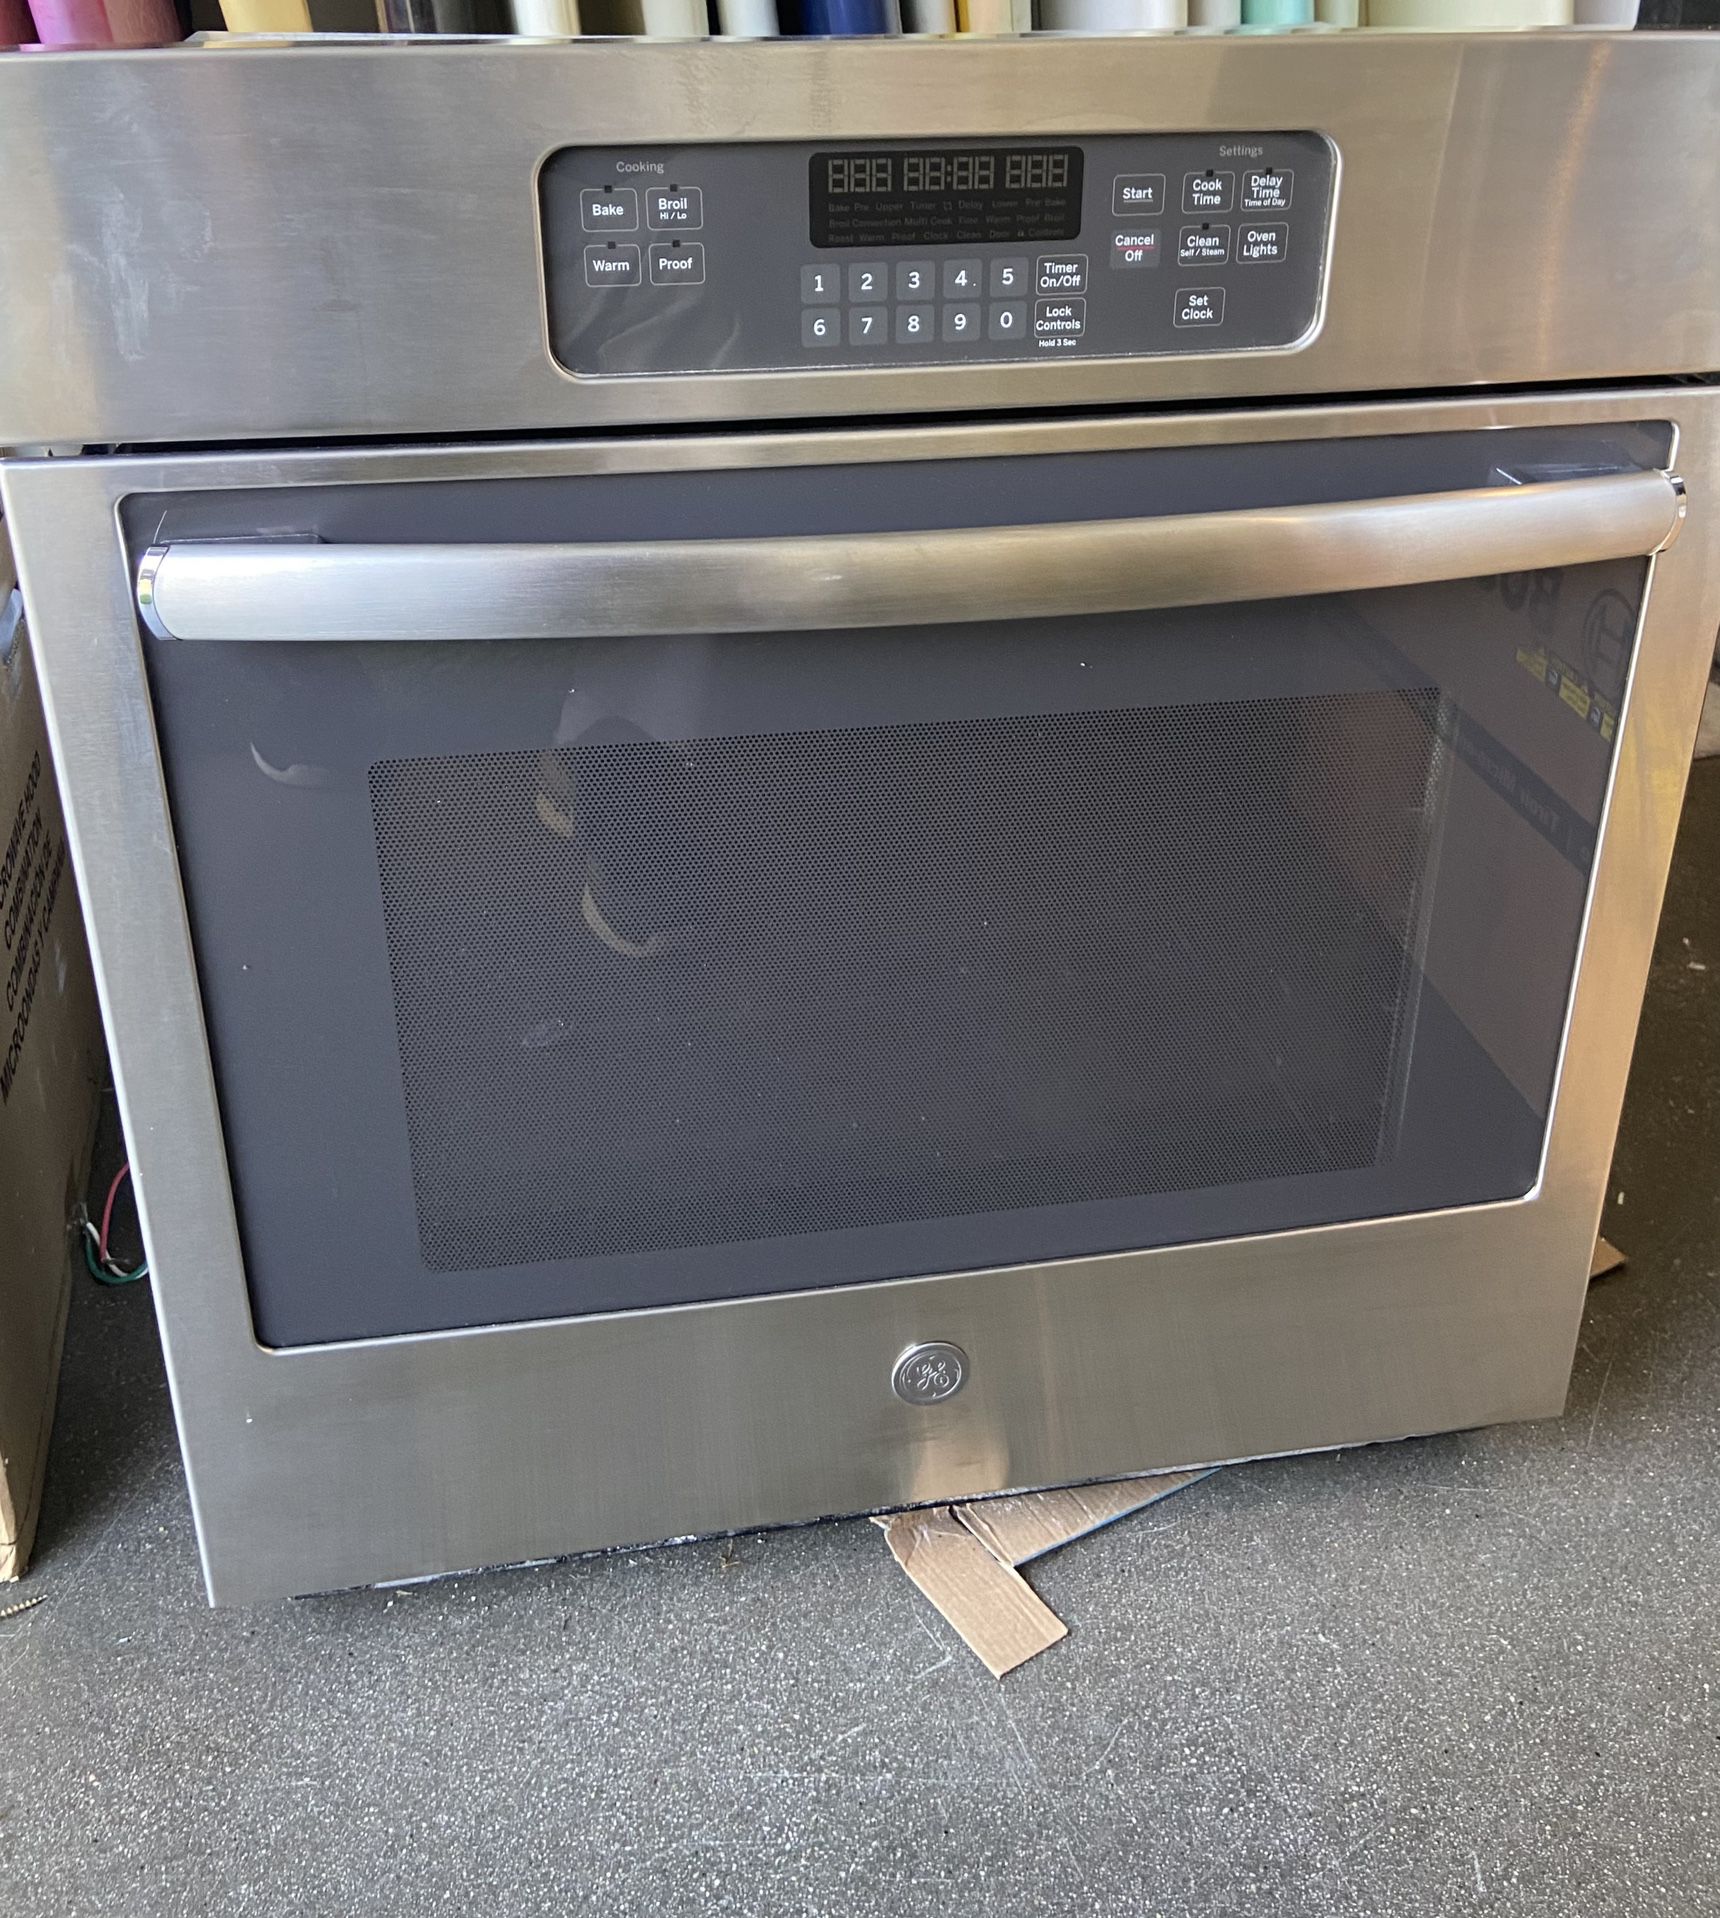 GE 27” Wall Oven - Stainless Steel